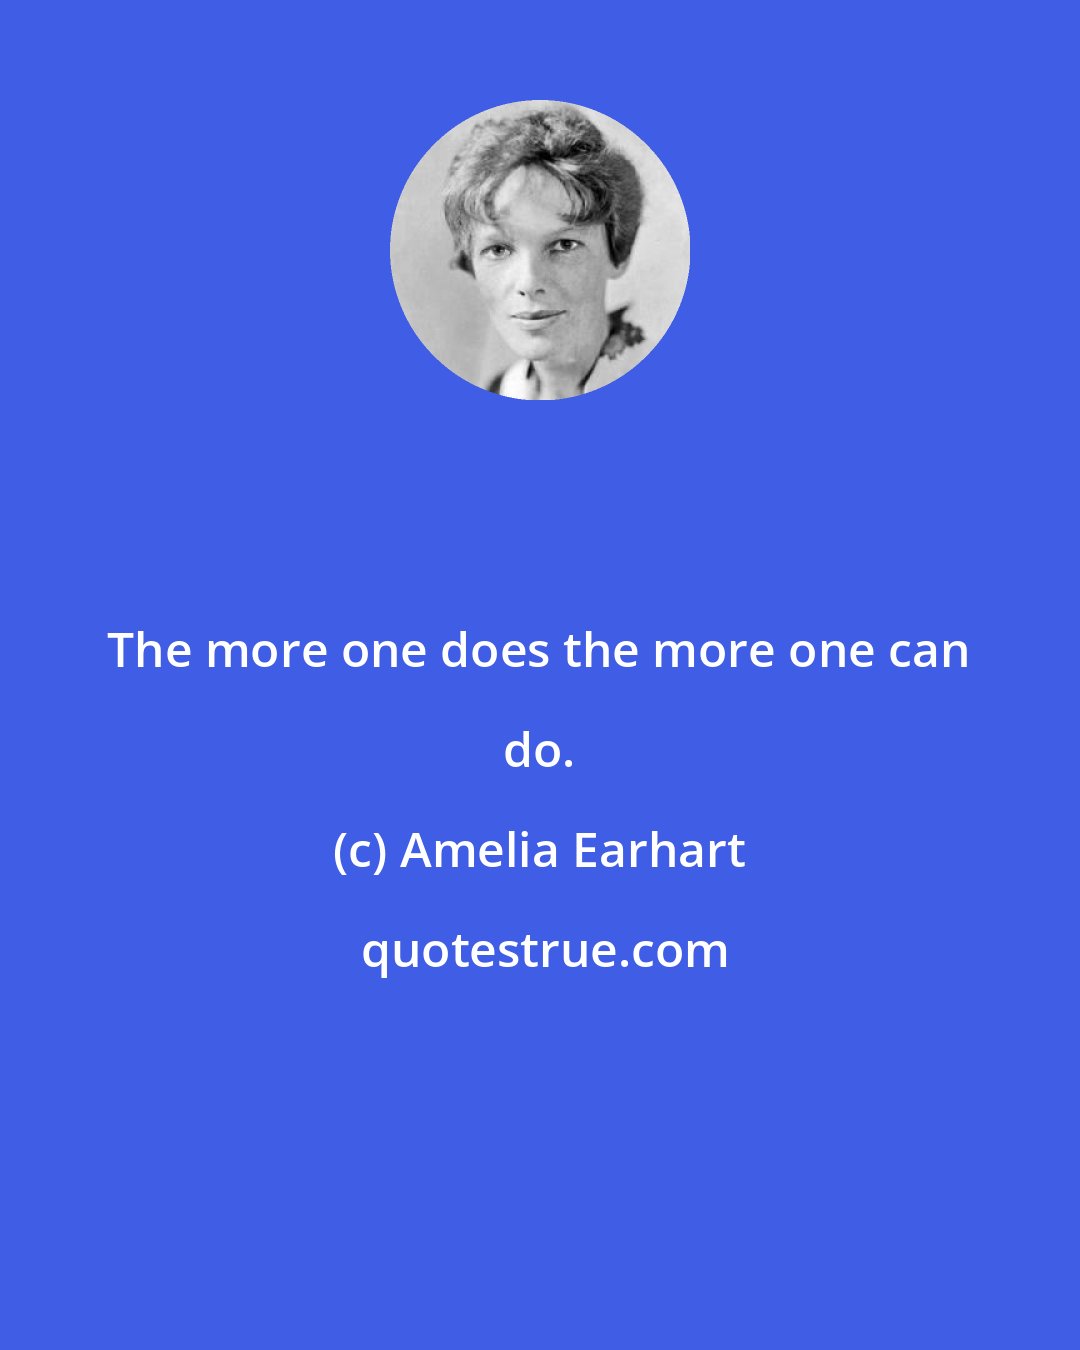 Amelia Earhart: The more one does the more one can do.